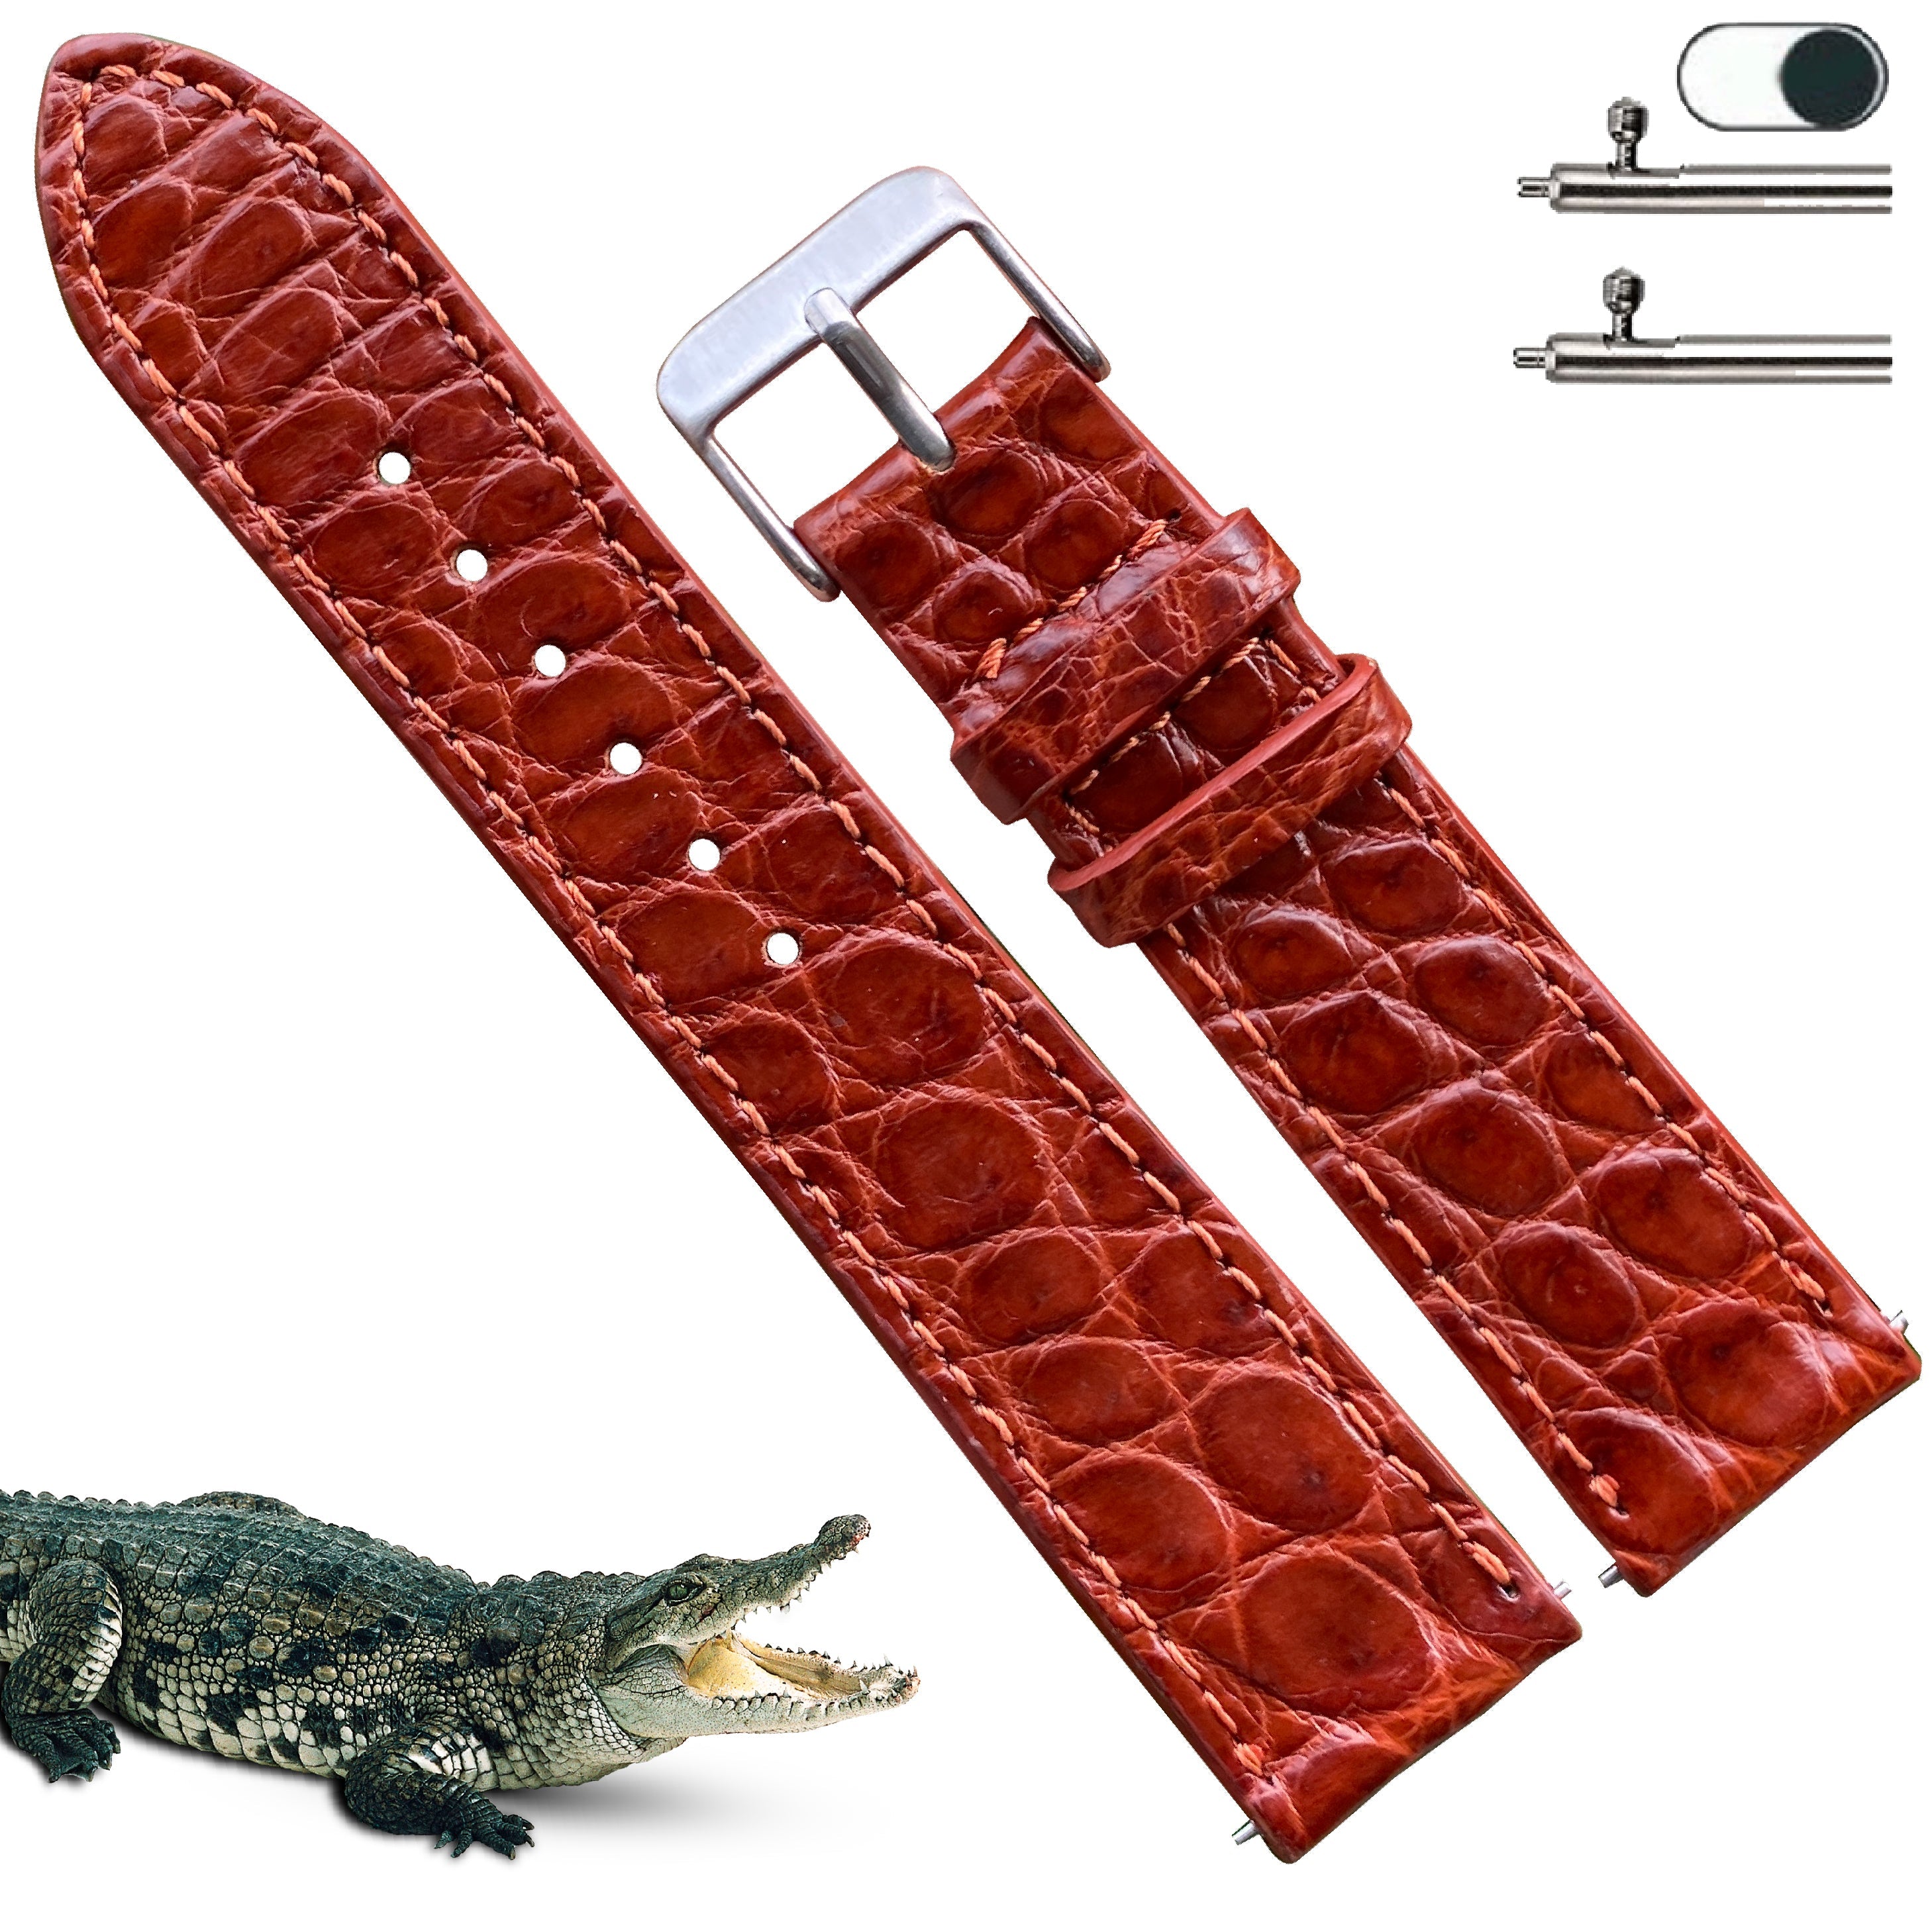 Light Brown Flat Alligator Leather Watch Band For Men | No-Padding | DH-26 - Vinacreations